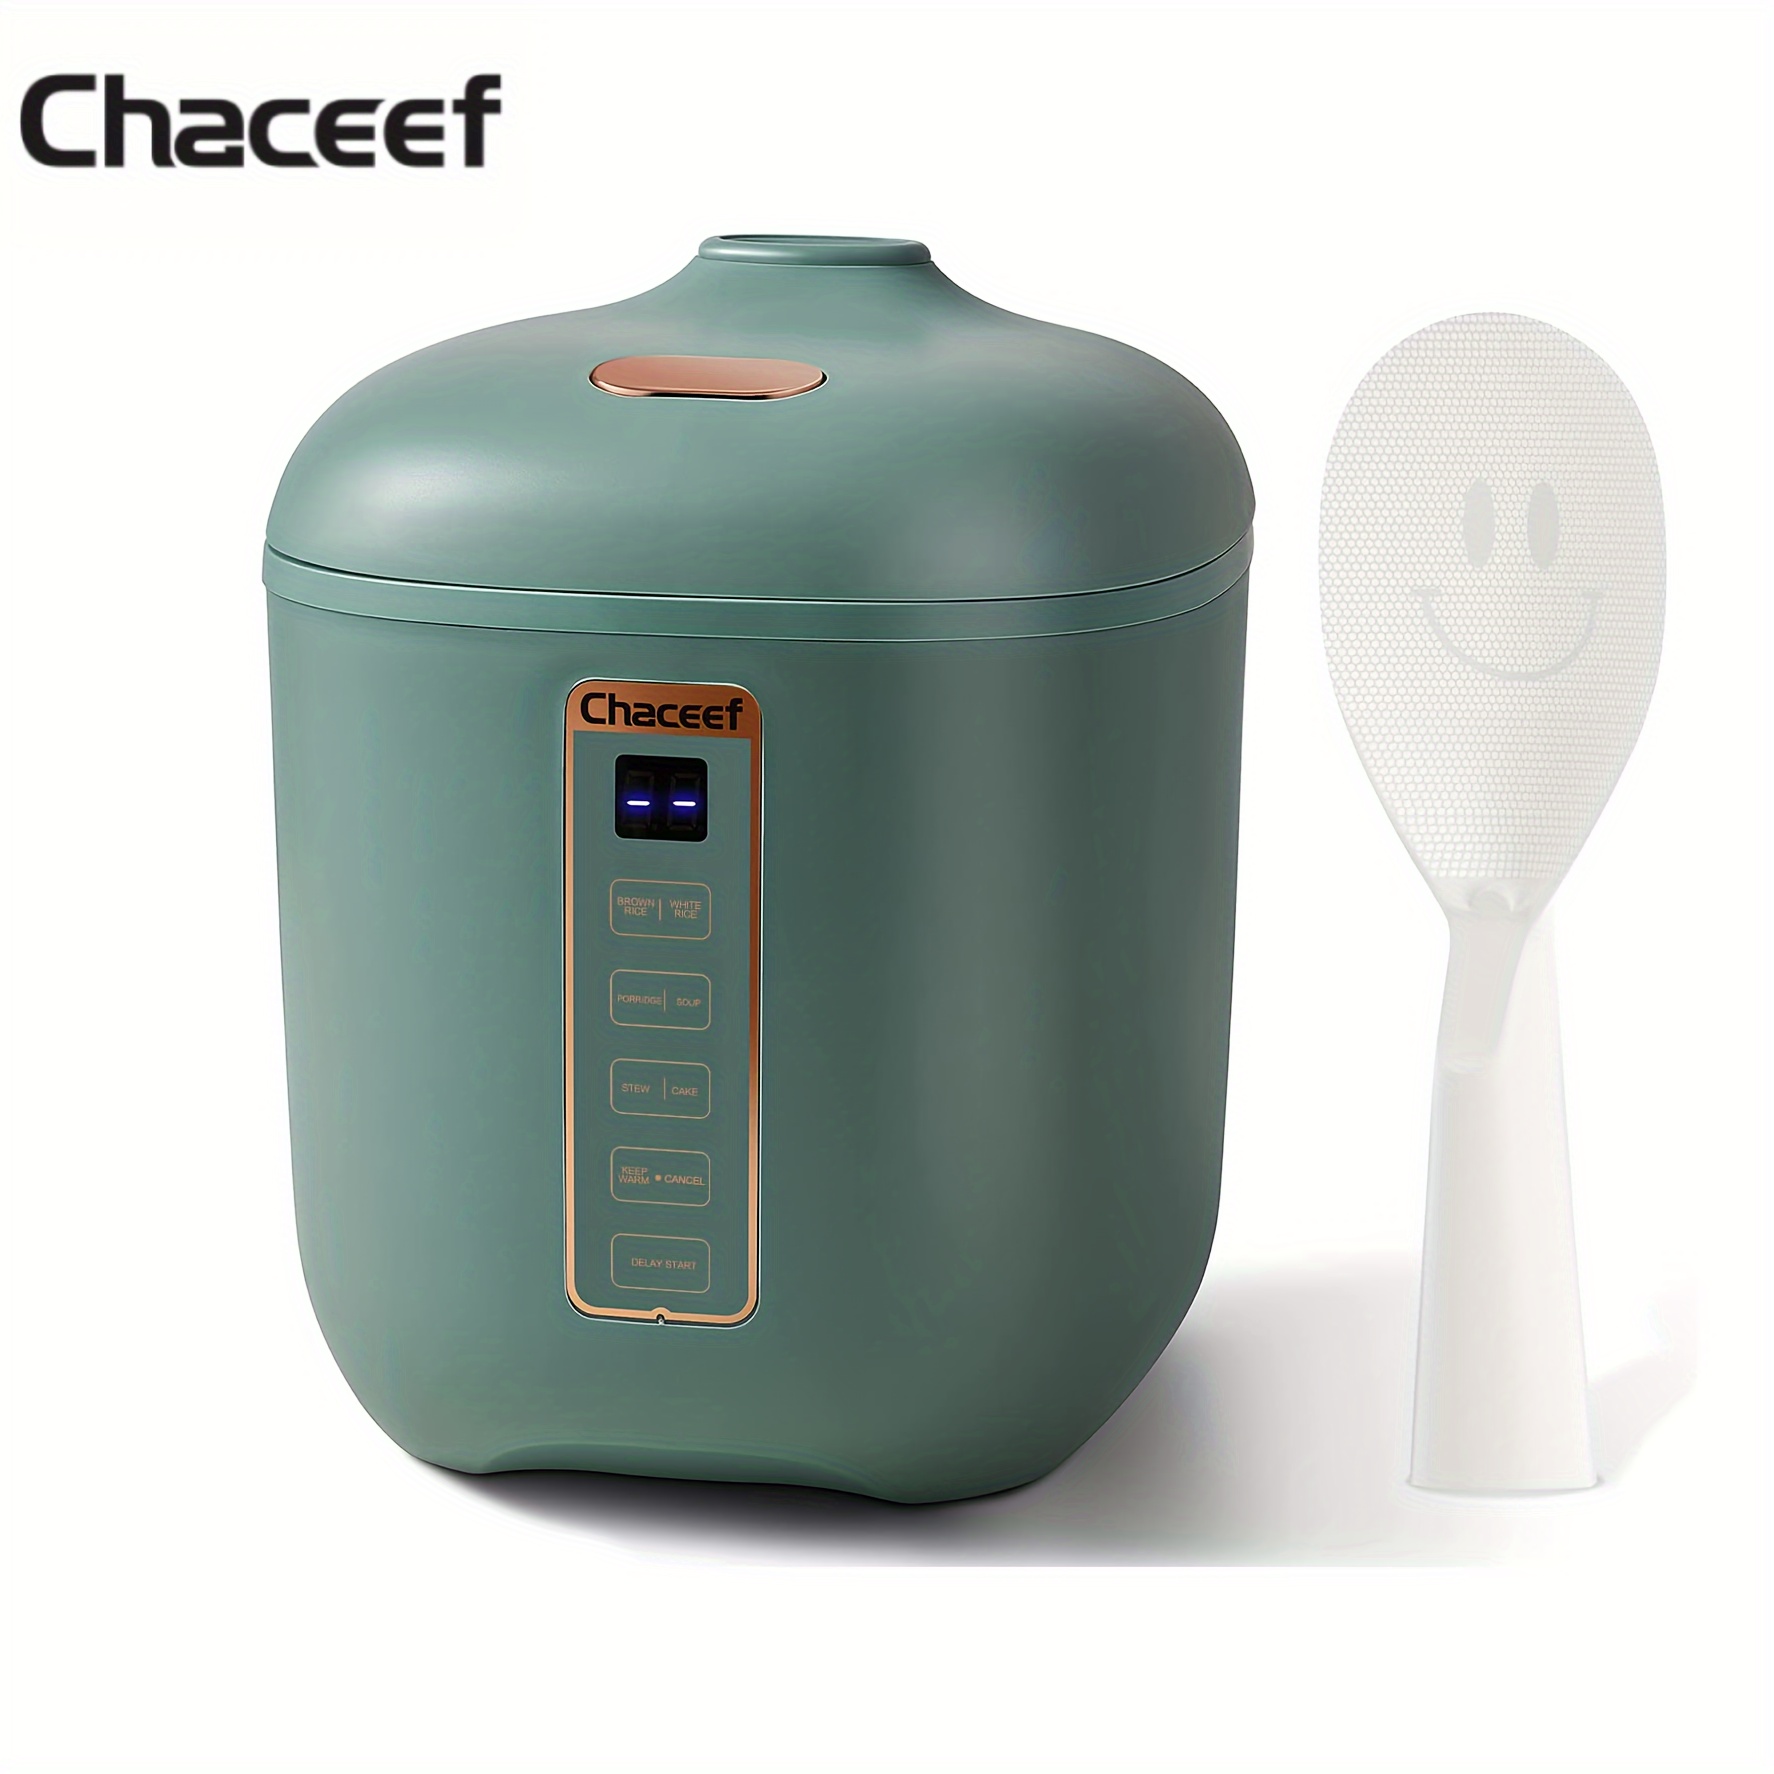 

Chaceef Mini Rice Cooker 2-cups Uncooked, 1.2l Portable Non-stick, Smart Control Multifunction Small Travel Cooker With 24 Hours Timer Delay & Keep Warm Function, Food Steamer.